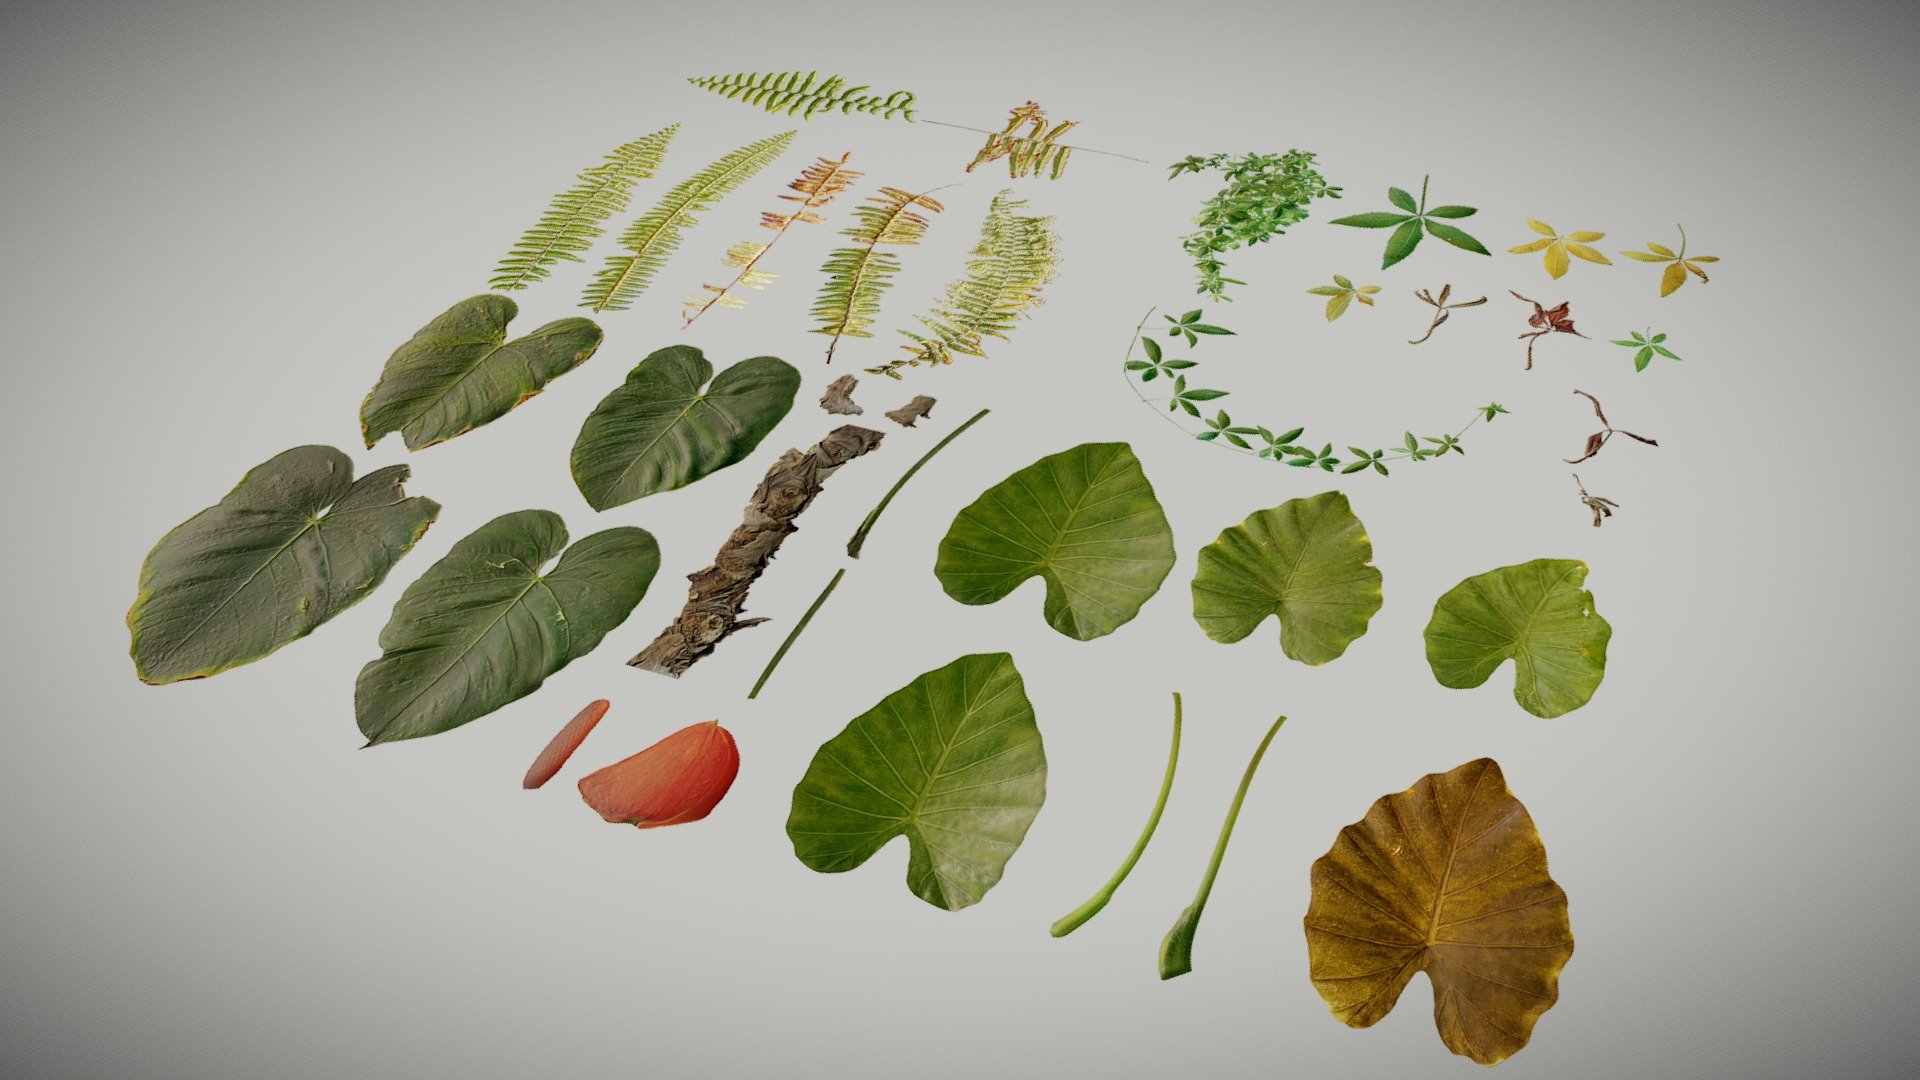 Details

4K textures

4 materials:

-Anthurium

-Elephant  Ear

-Ivy Herb

-Fern

Base Color, Normal, Roughness, Translucency and Opacity

Contact me for any issue or questions https://www.artstation.com/bpaul/profile - Atlases (Tropical Plants) No. 1 - Buy Royalty Free 3D model by Paul (@nathan.d1563) 3d model